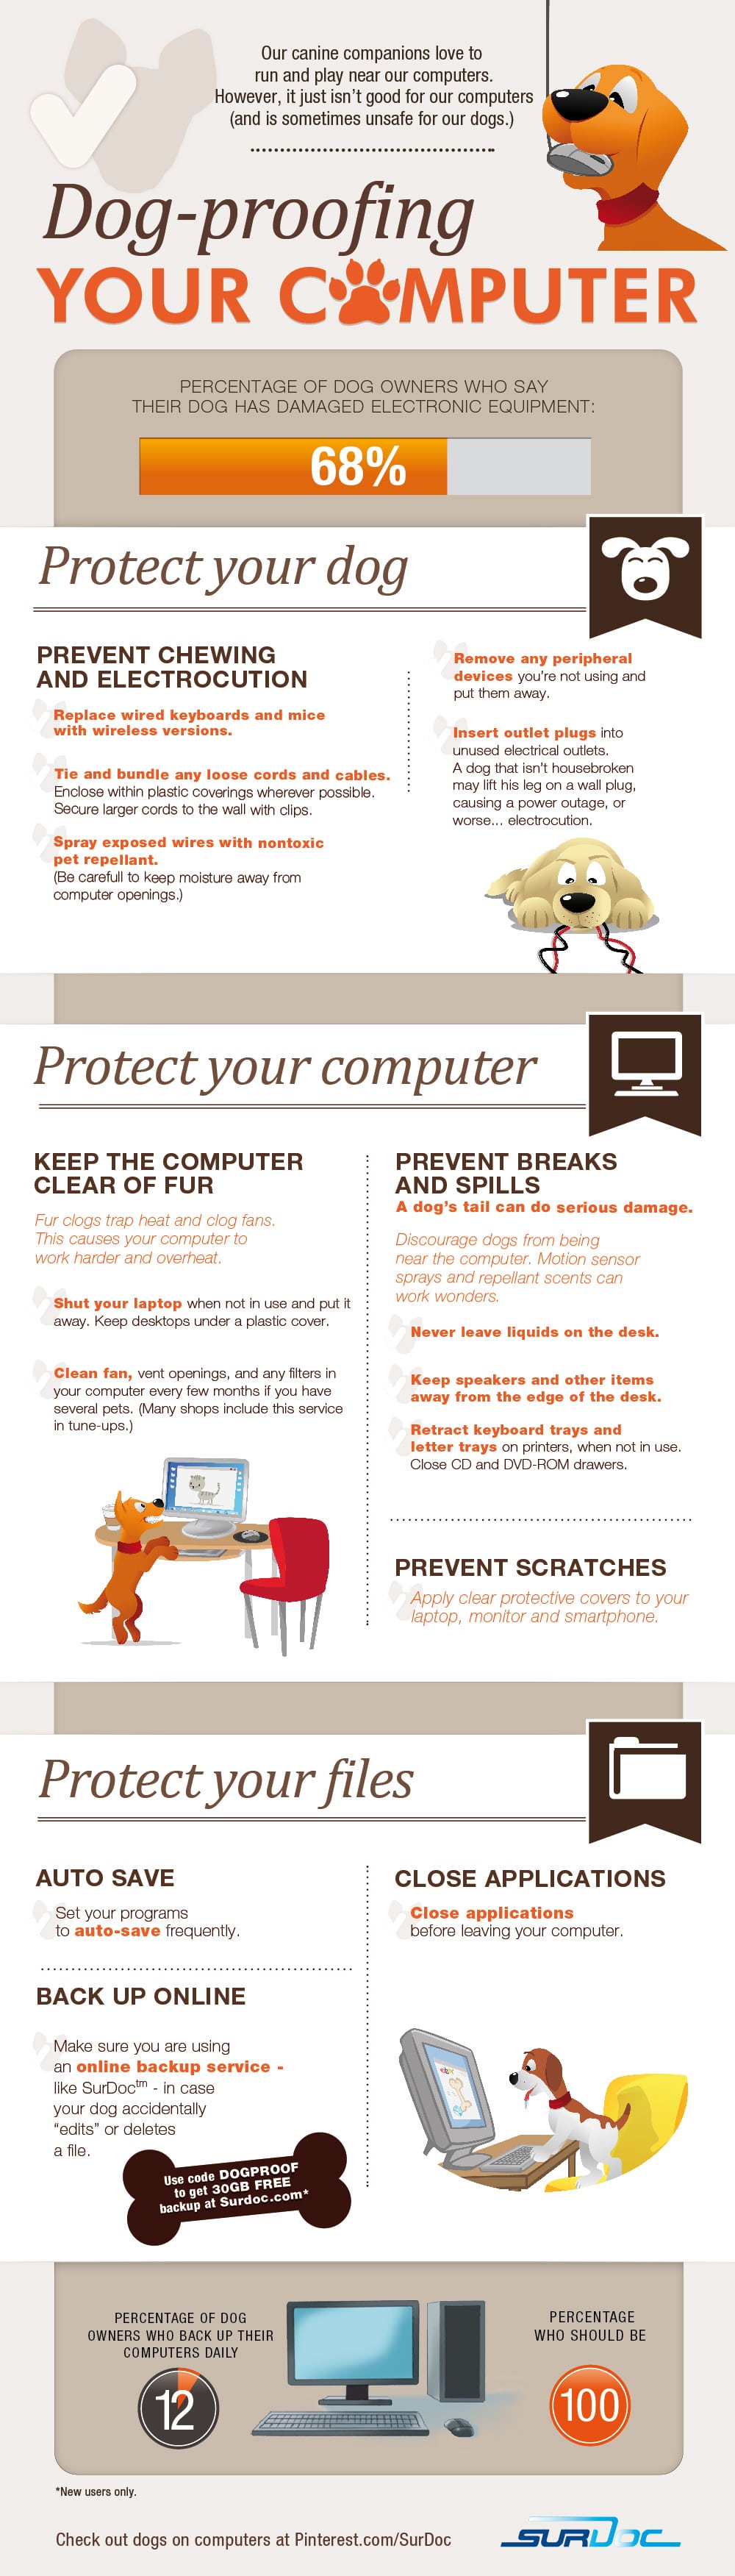 How To Dog-Proof Your Computer [Infographic]